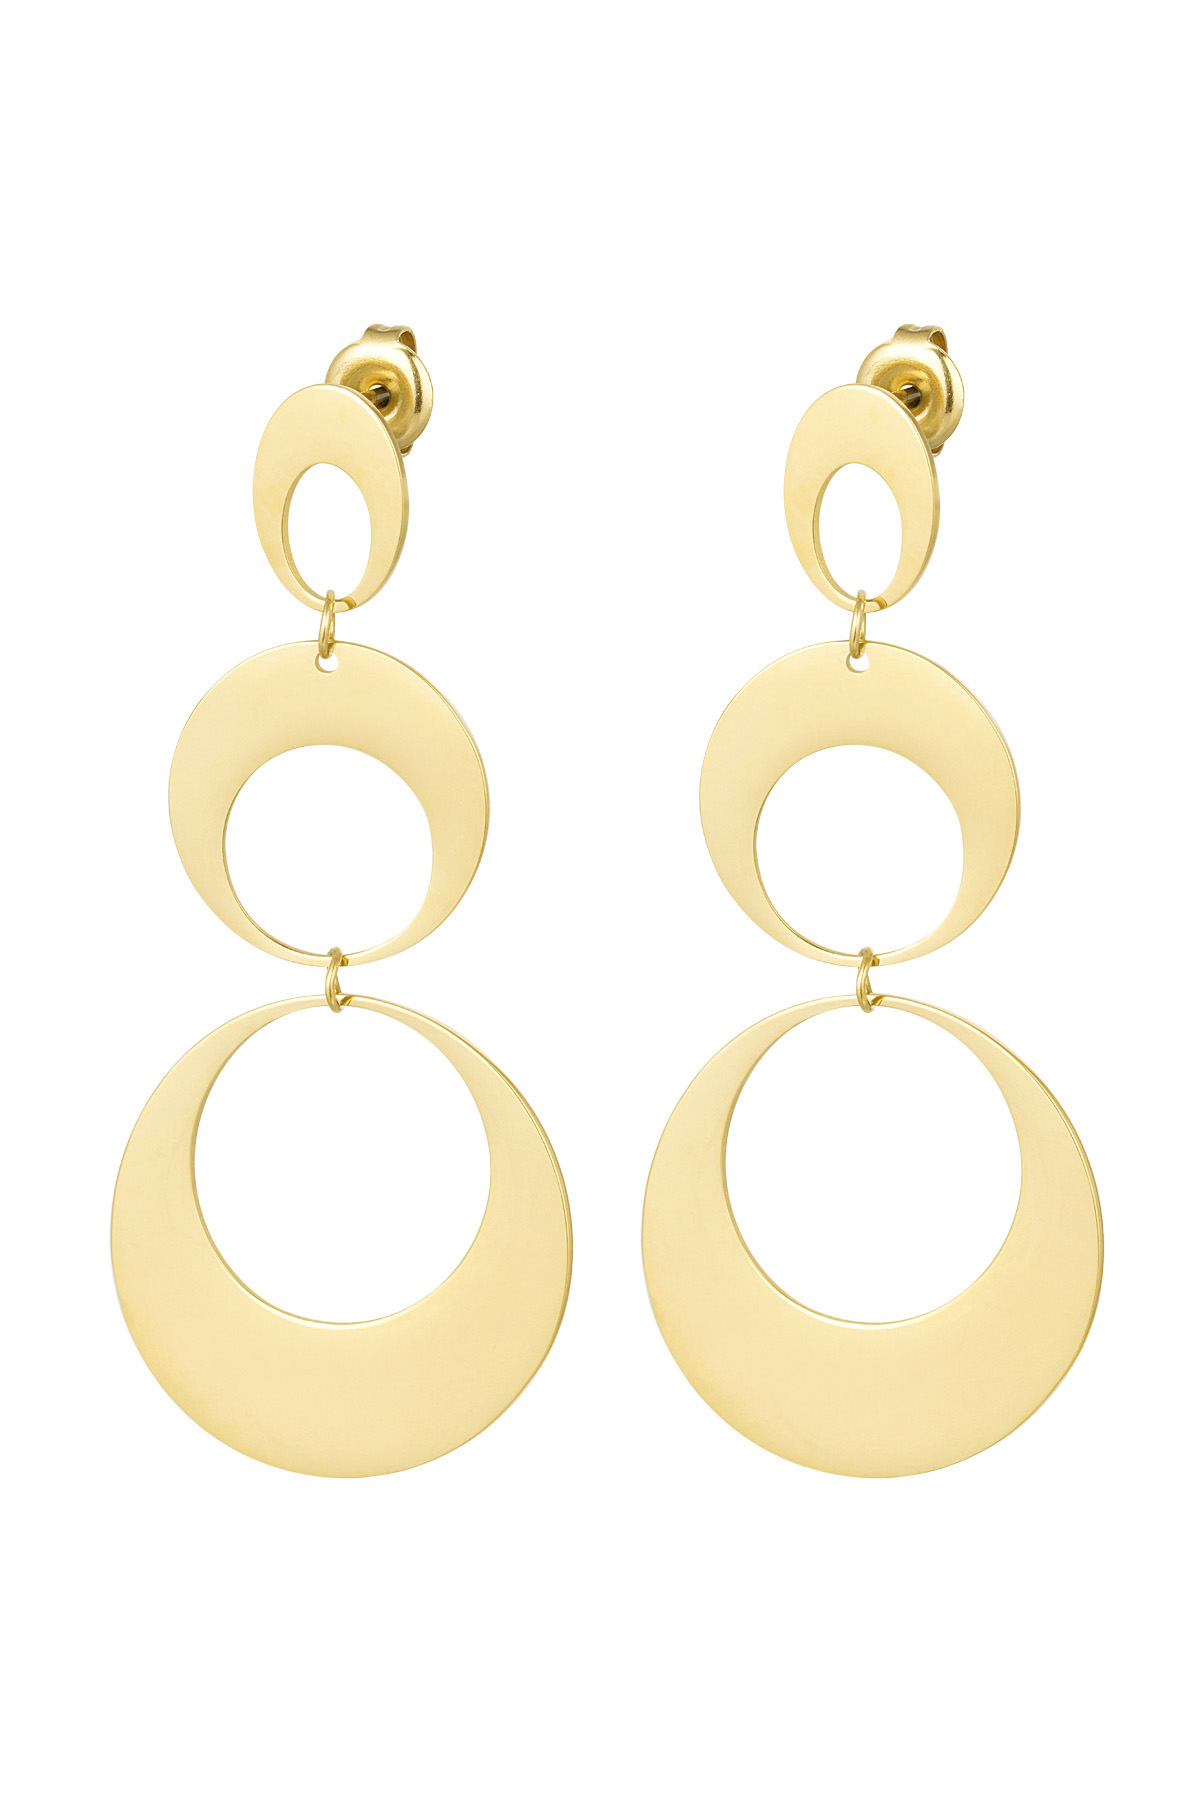 Earrings statement circles - gold